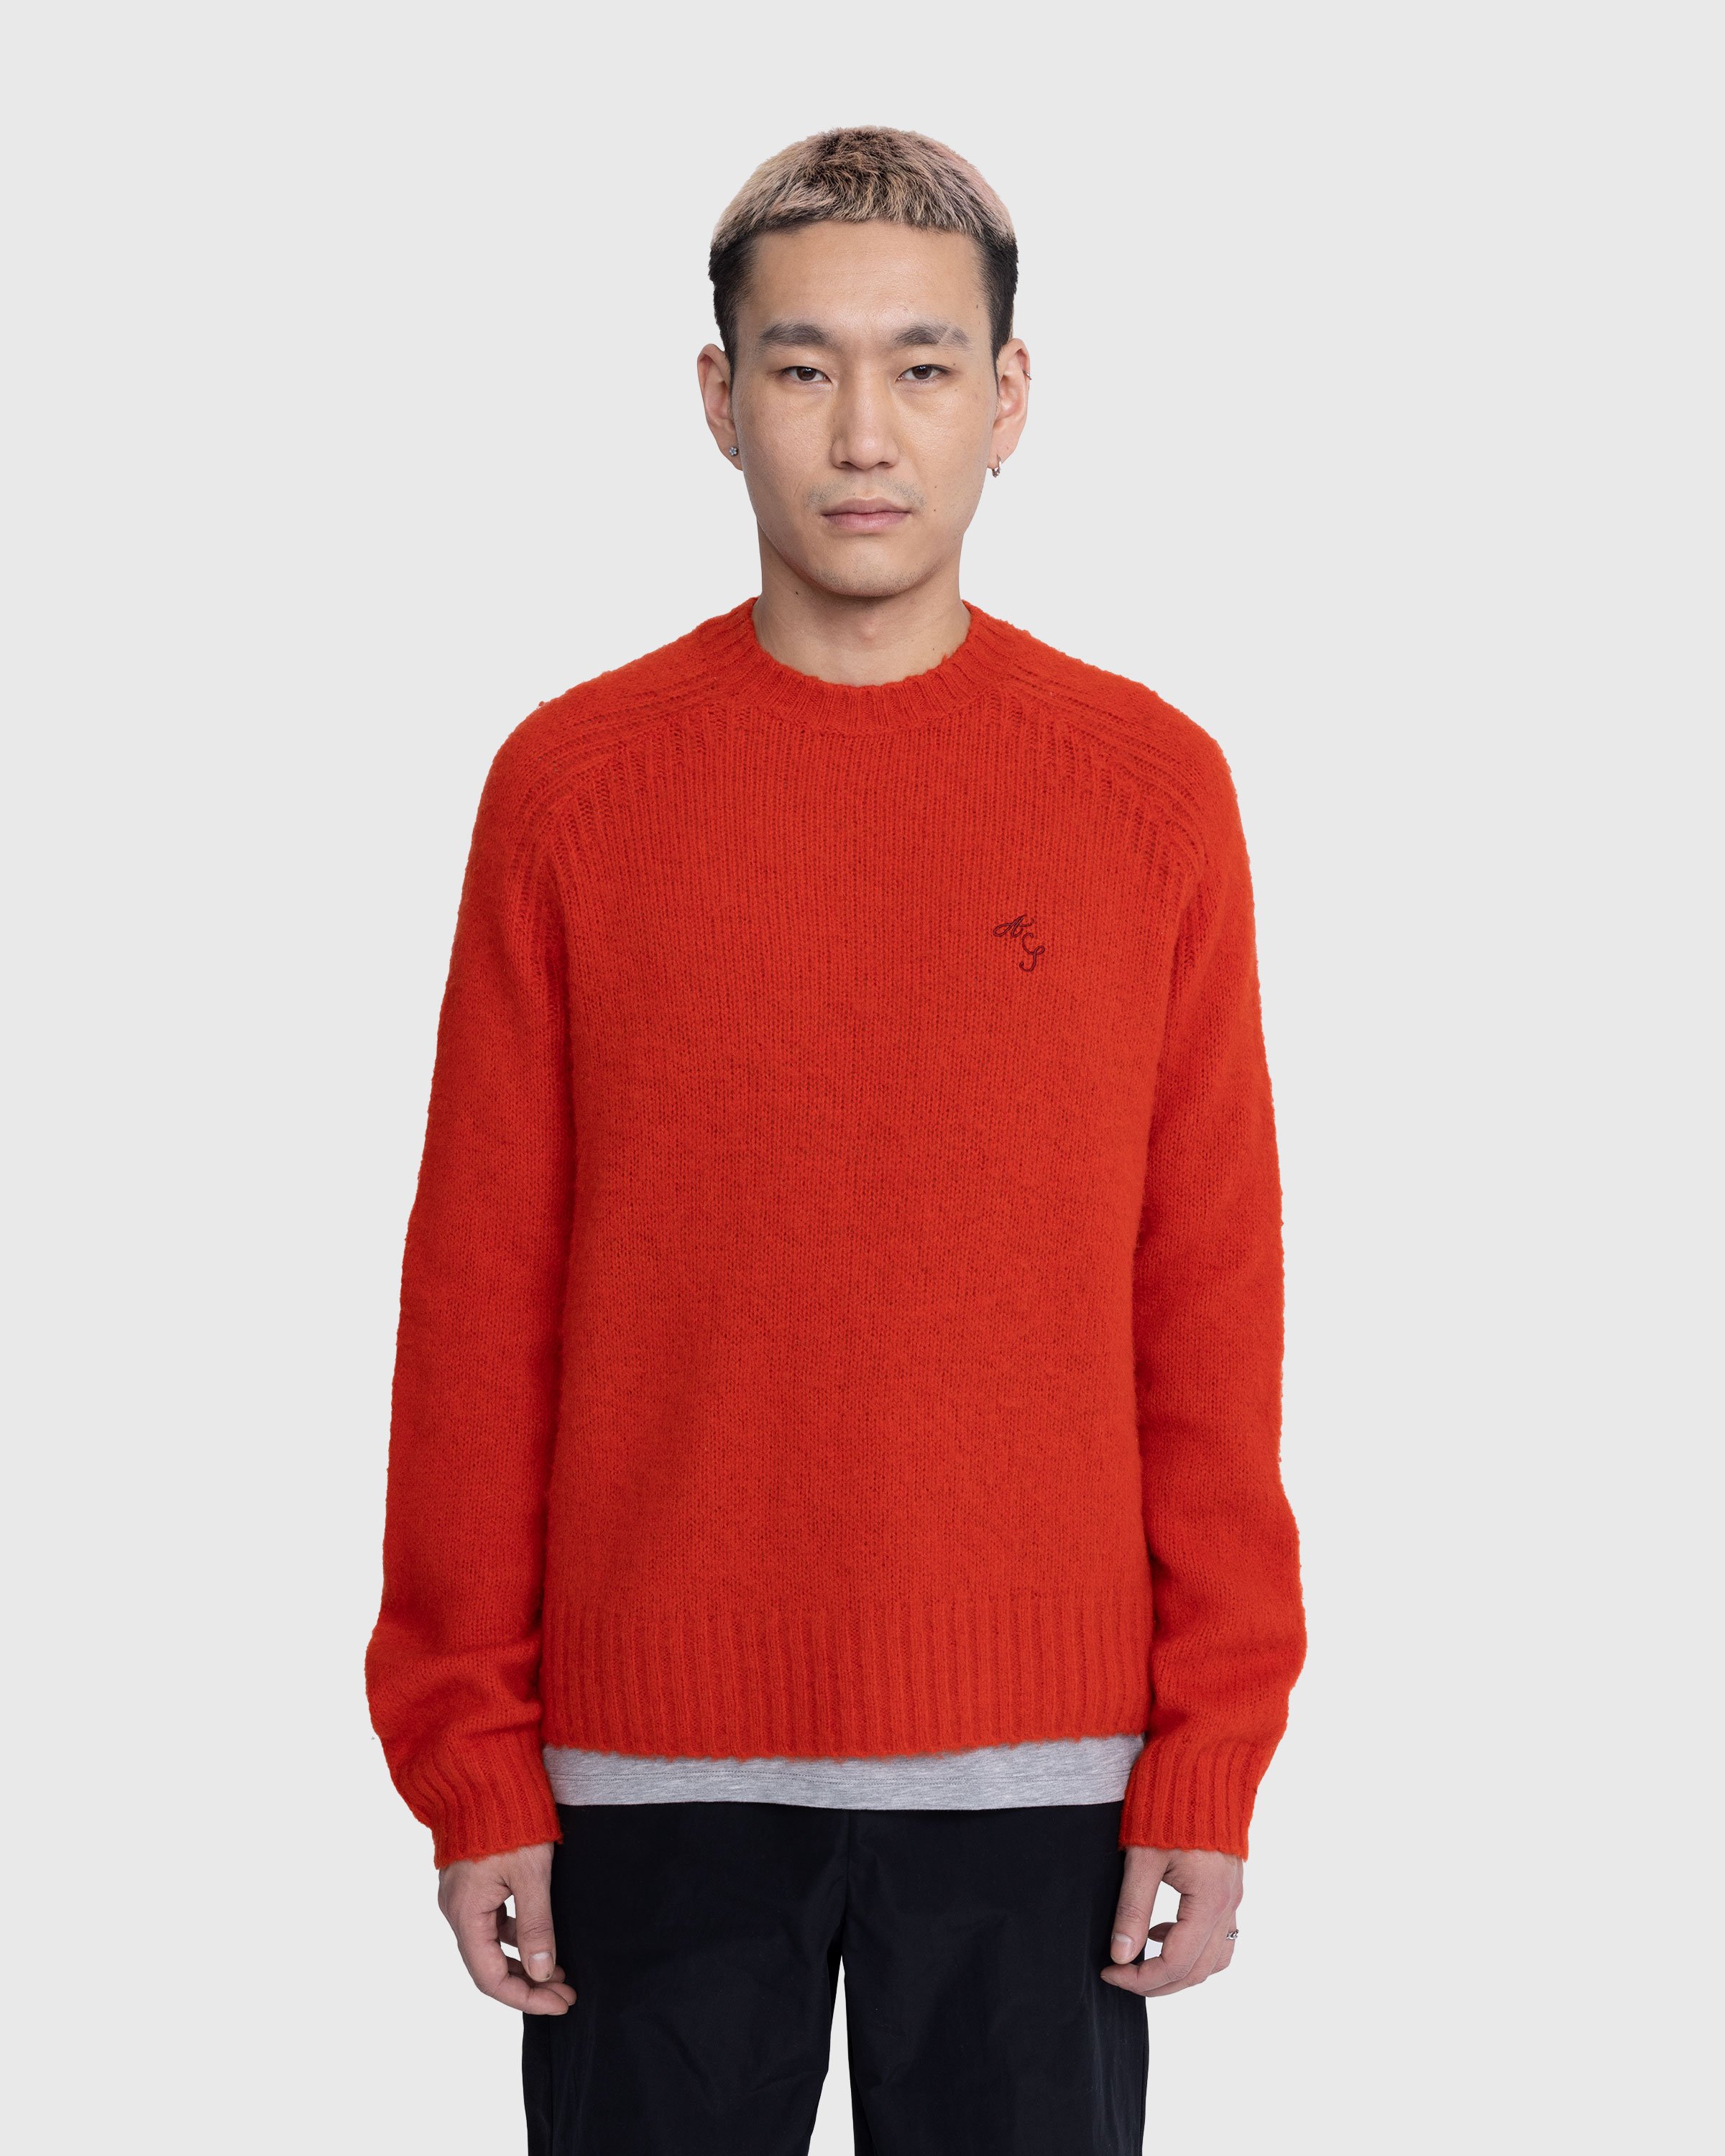 Acne Studios - Embroidered Crewneck Sweater Red - Clothing - Red - Image 2